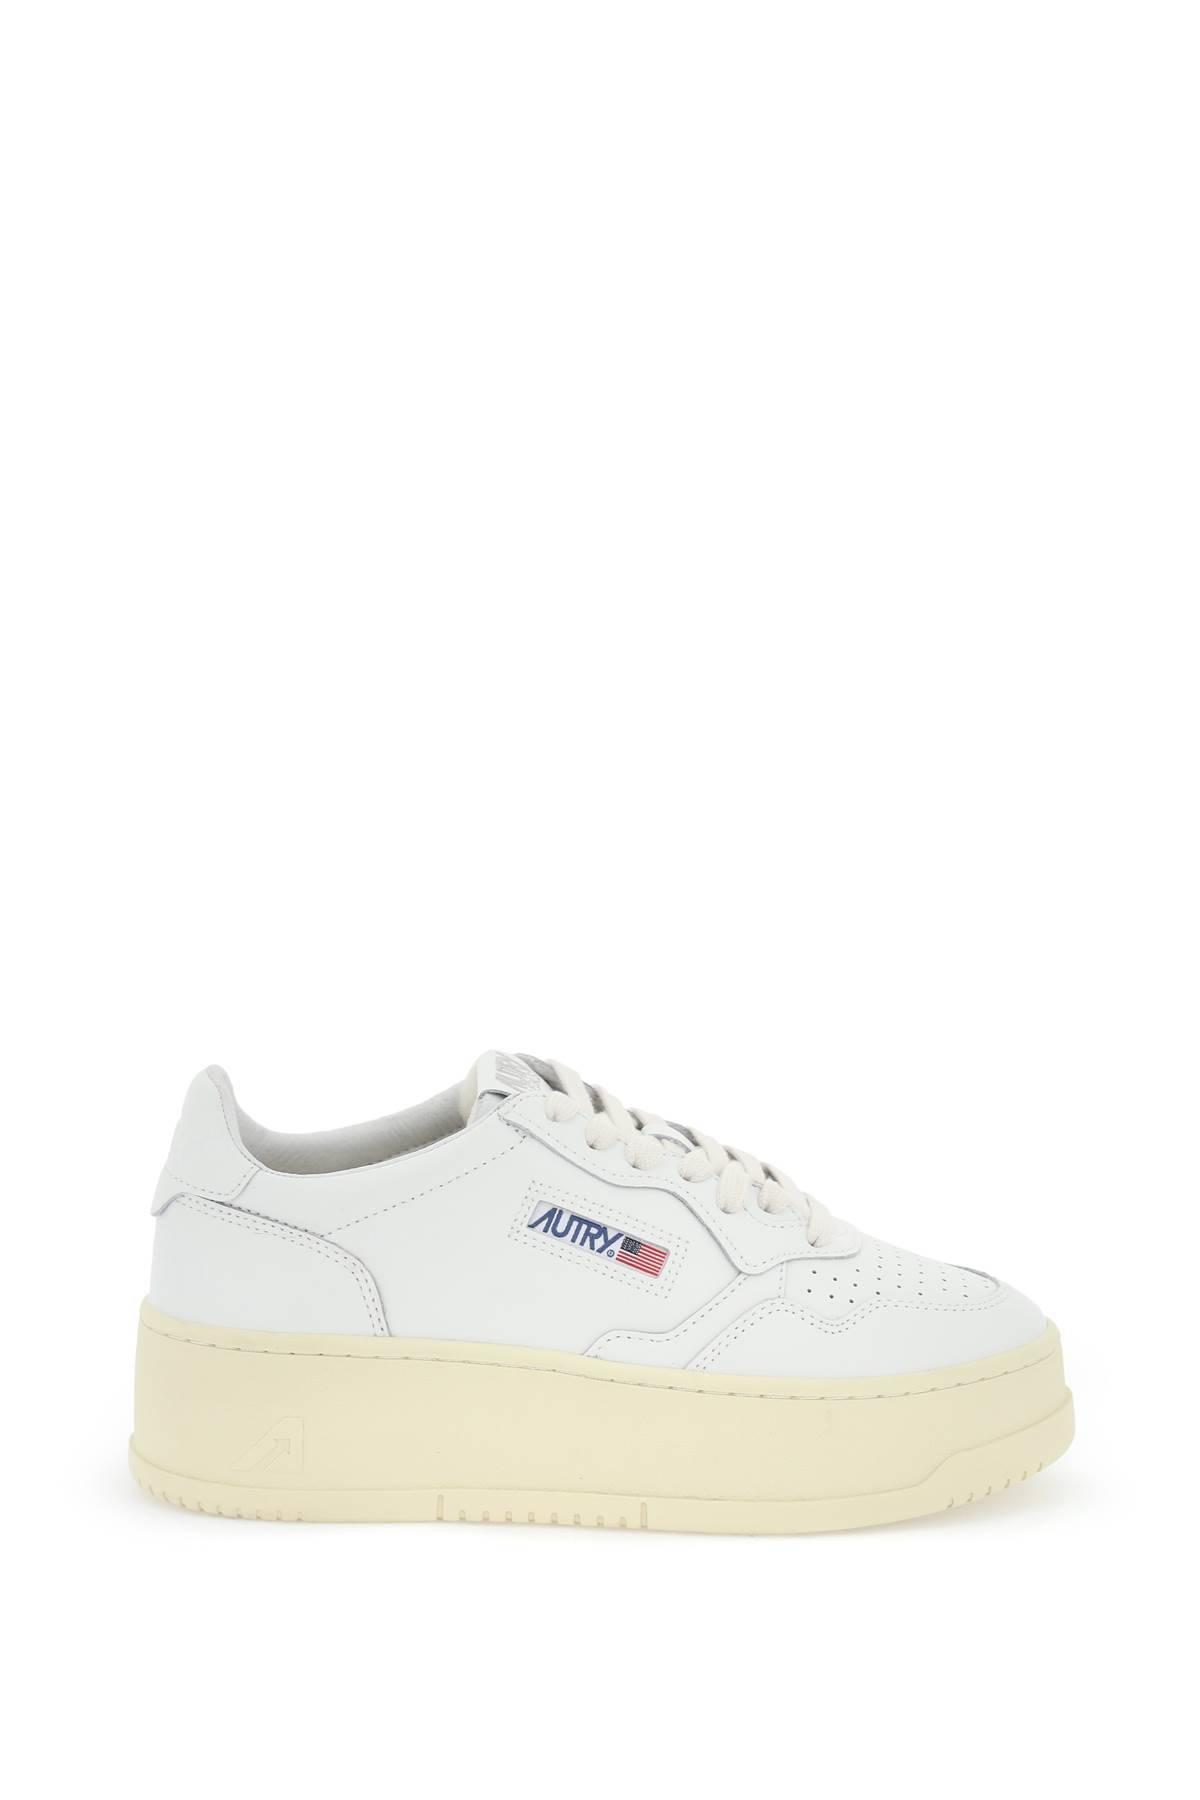 AUTRY AUTRY medalist low sneakers